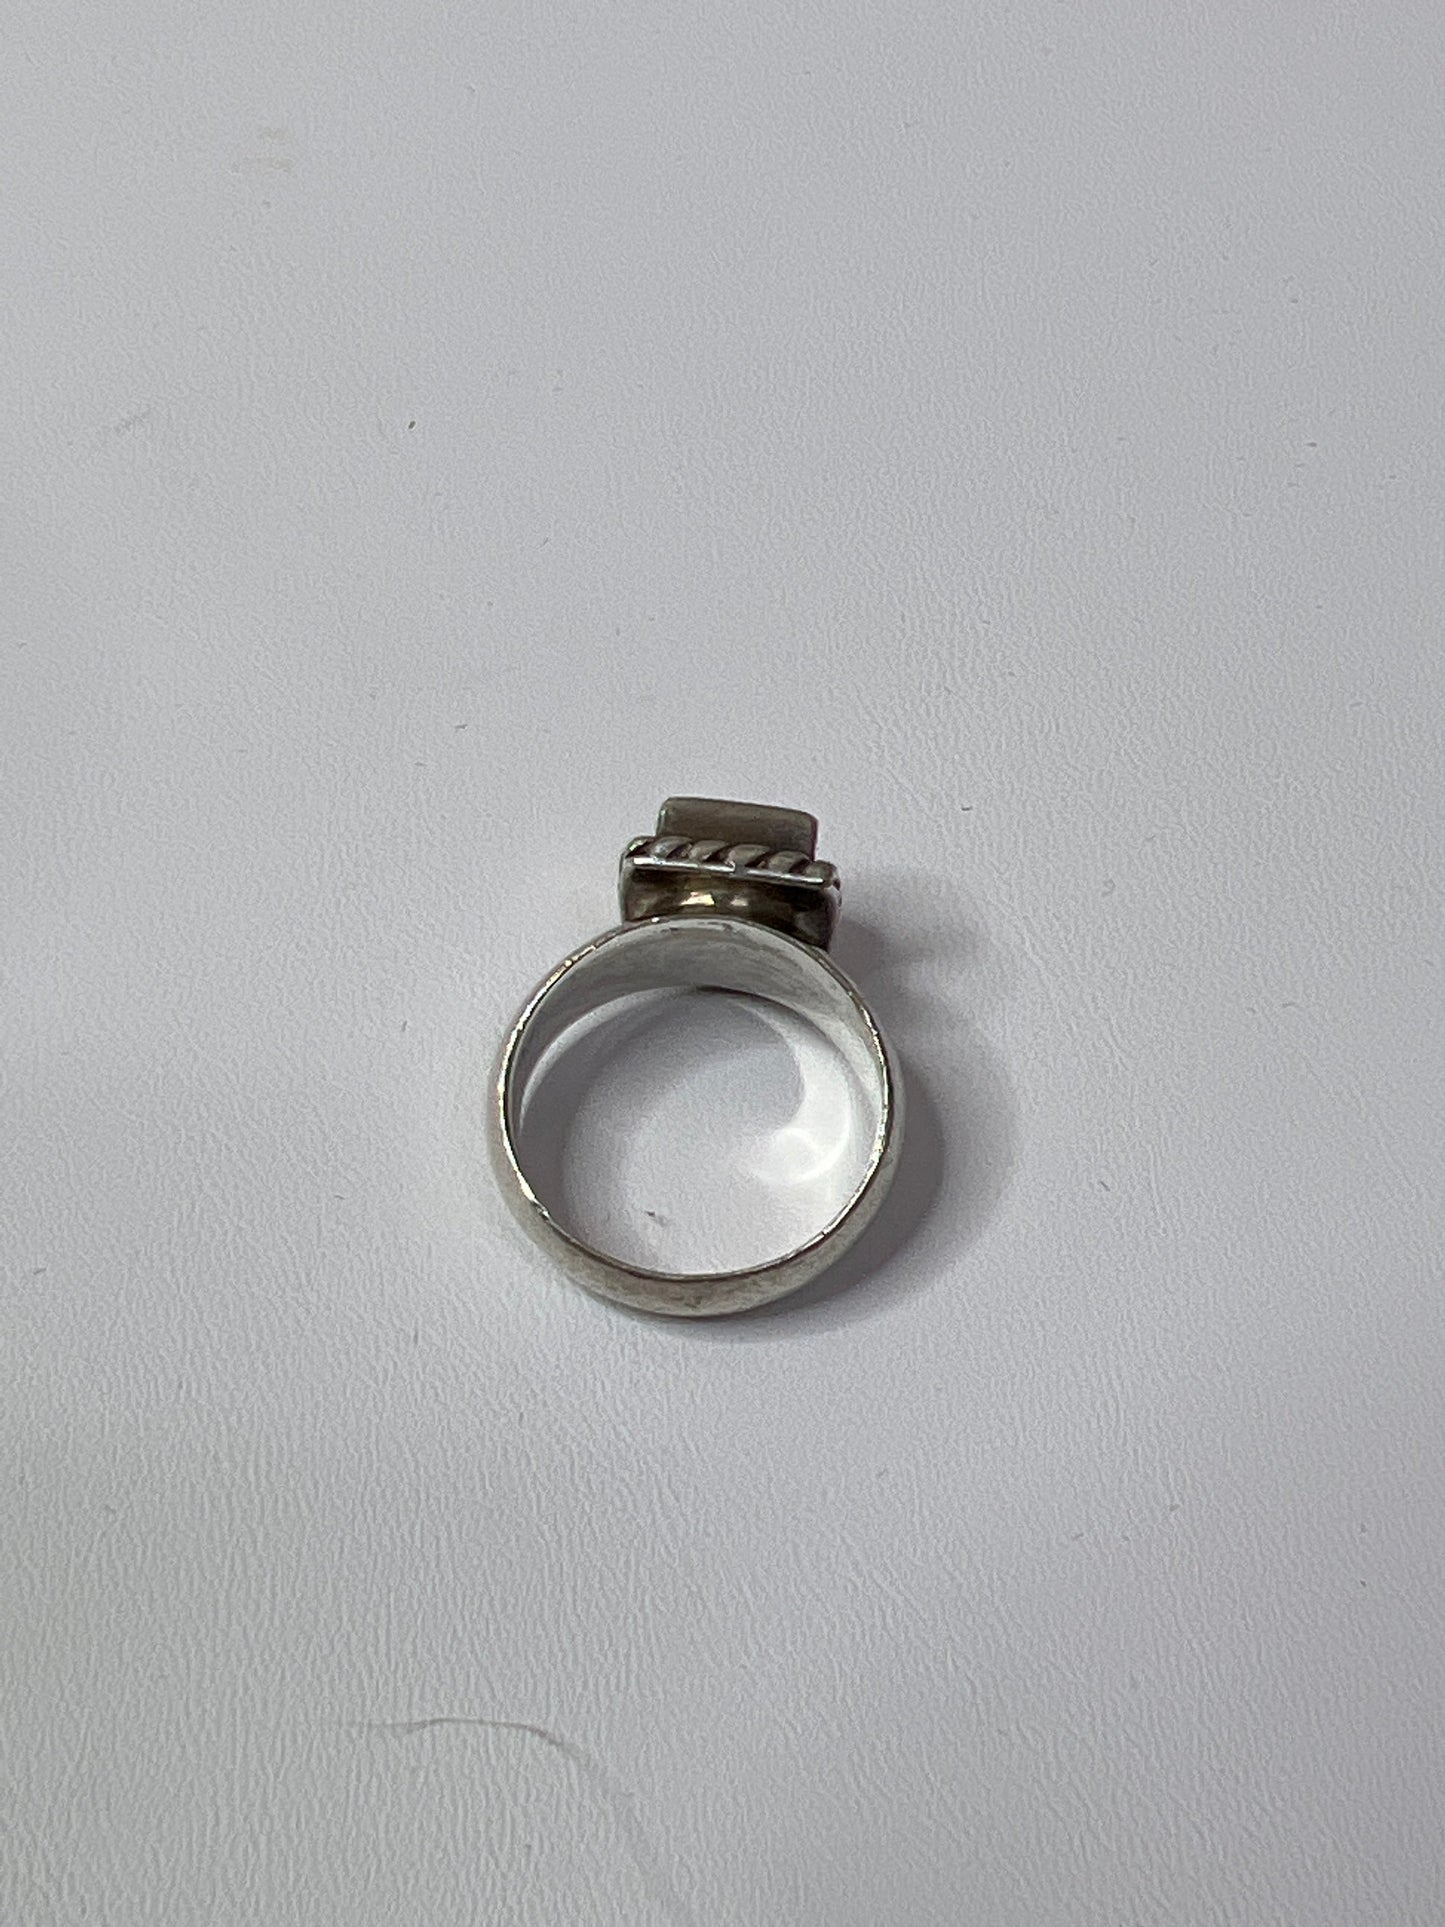 Ring Sterling Silver Silpada, Size 8